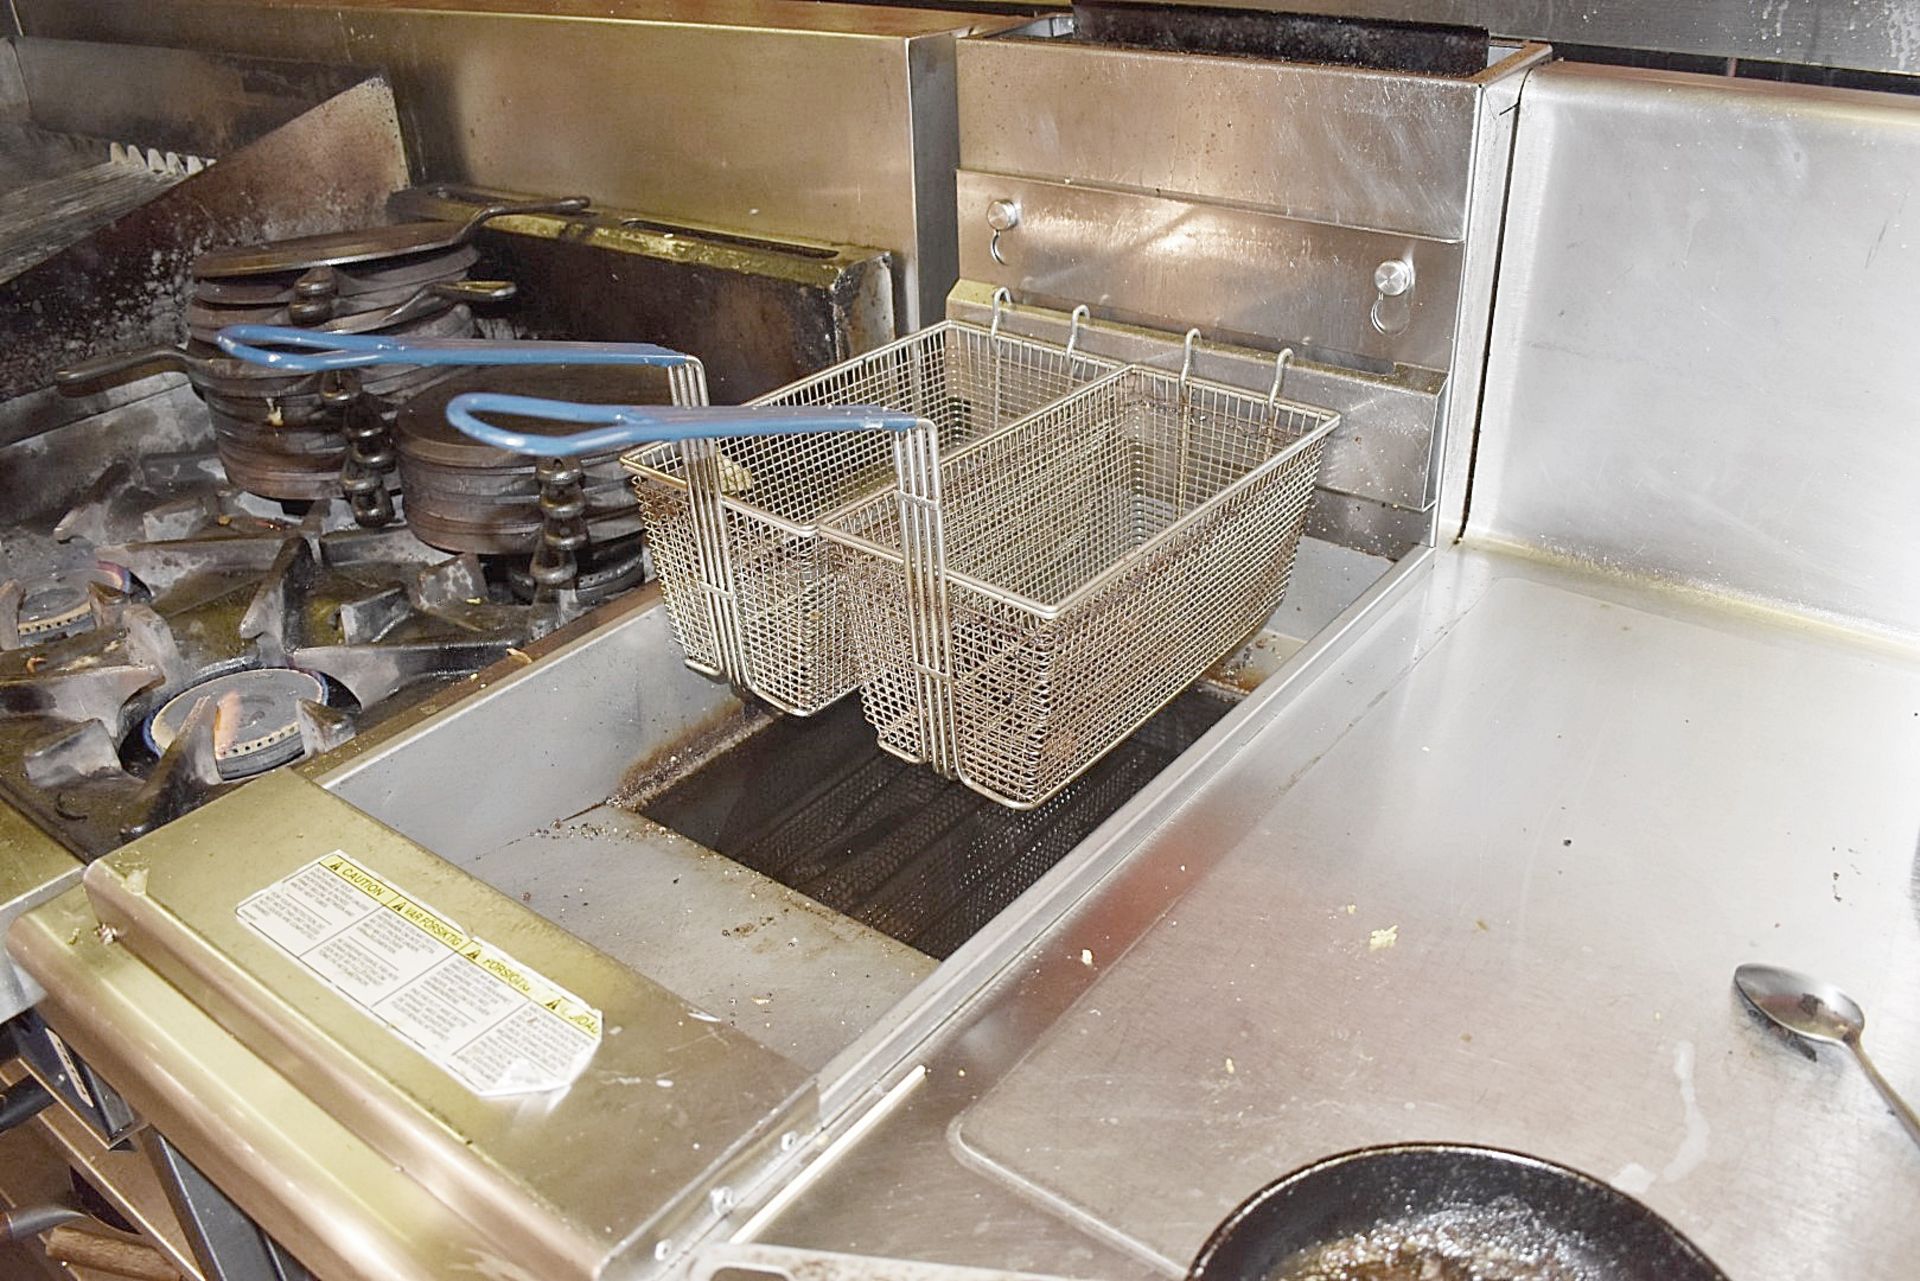 1 x Stainless Steel Preparation / Serving Area - Features Fryers, Gasto Pans, Counters, Shelving - Image 2 of 15